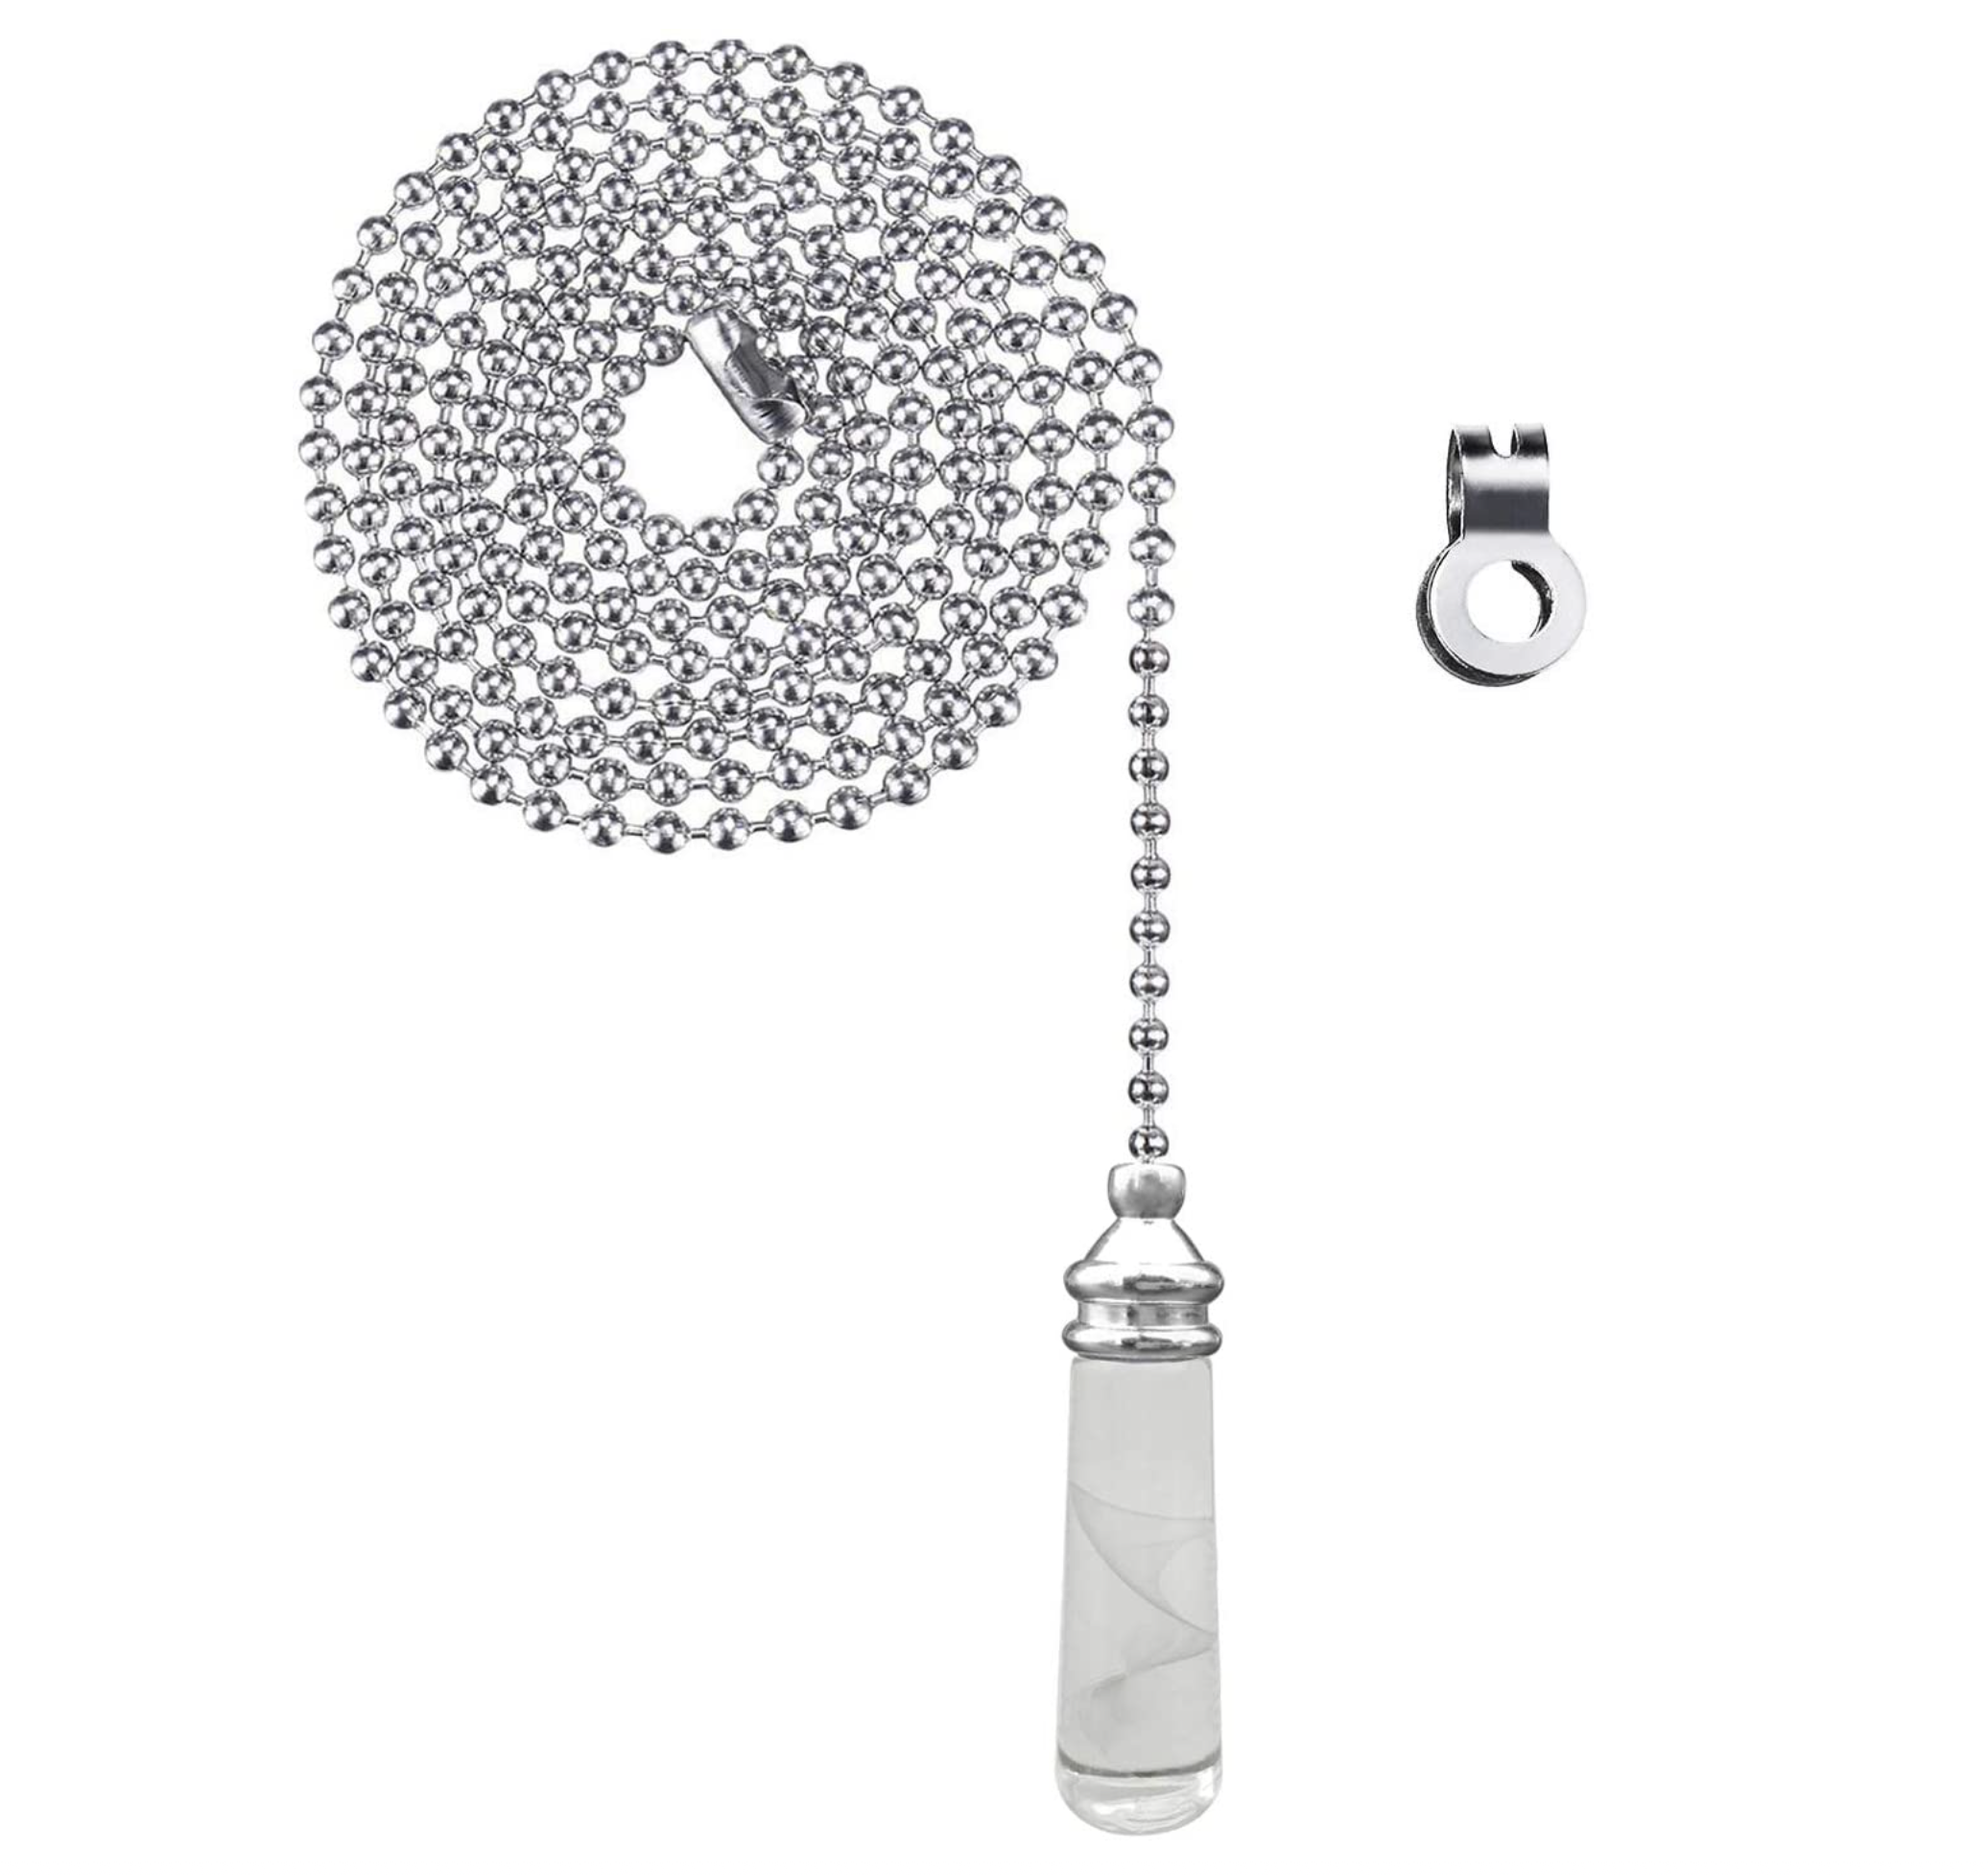 Taps2Traps® Traditional Crystal Style Decorative Bathroom Light Switch Pull Chain